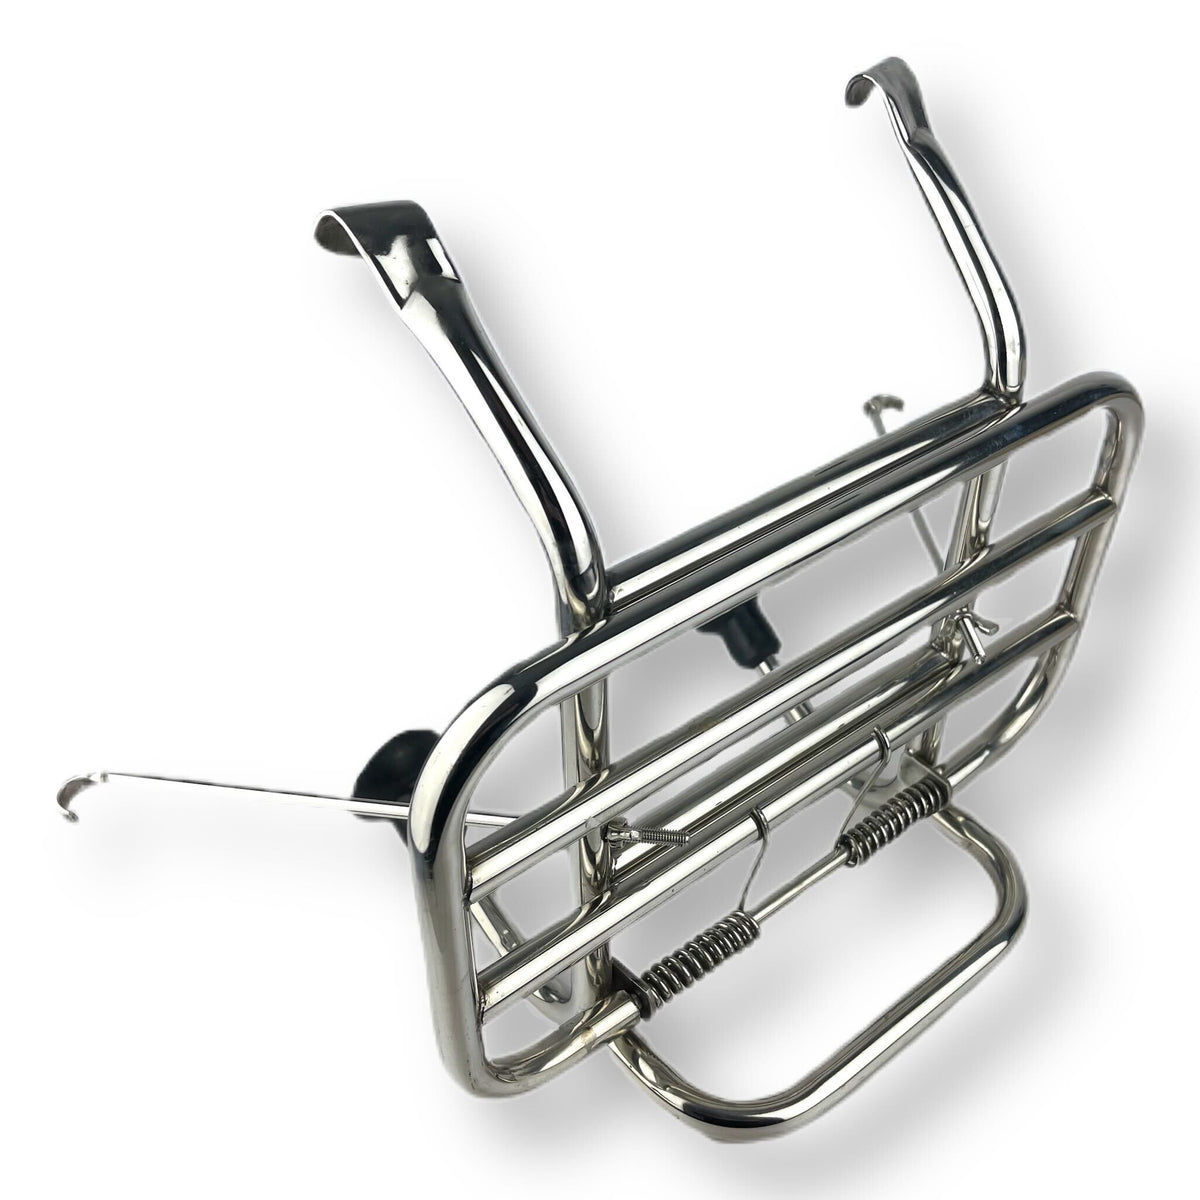 Scomadi Royal Alloy Front Carrier Flip Down Rack - Polished Stainless Steel